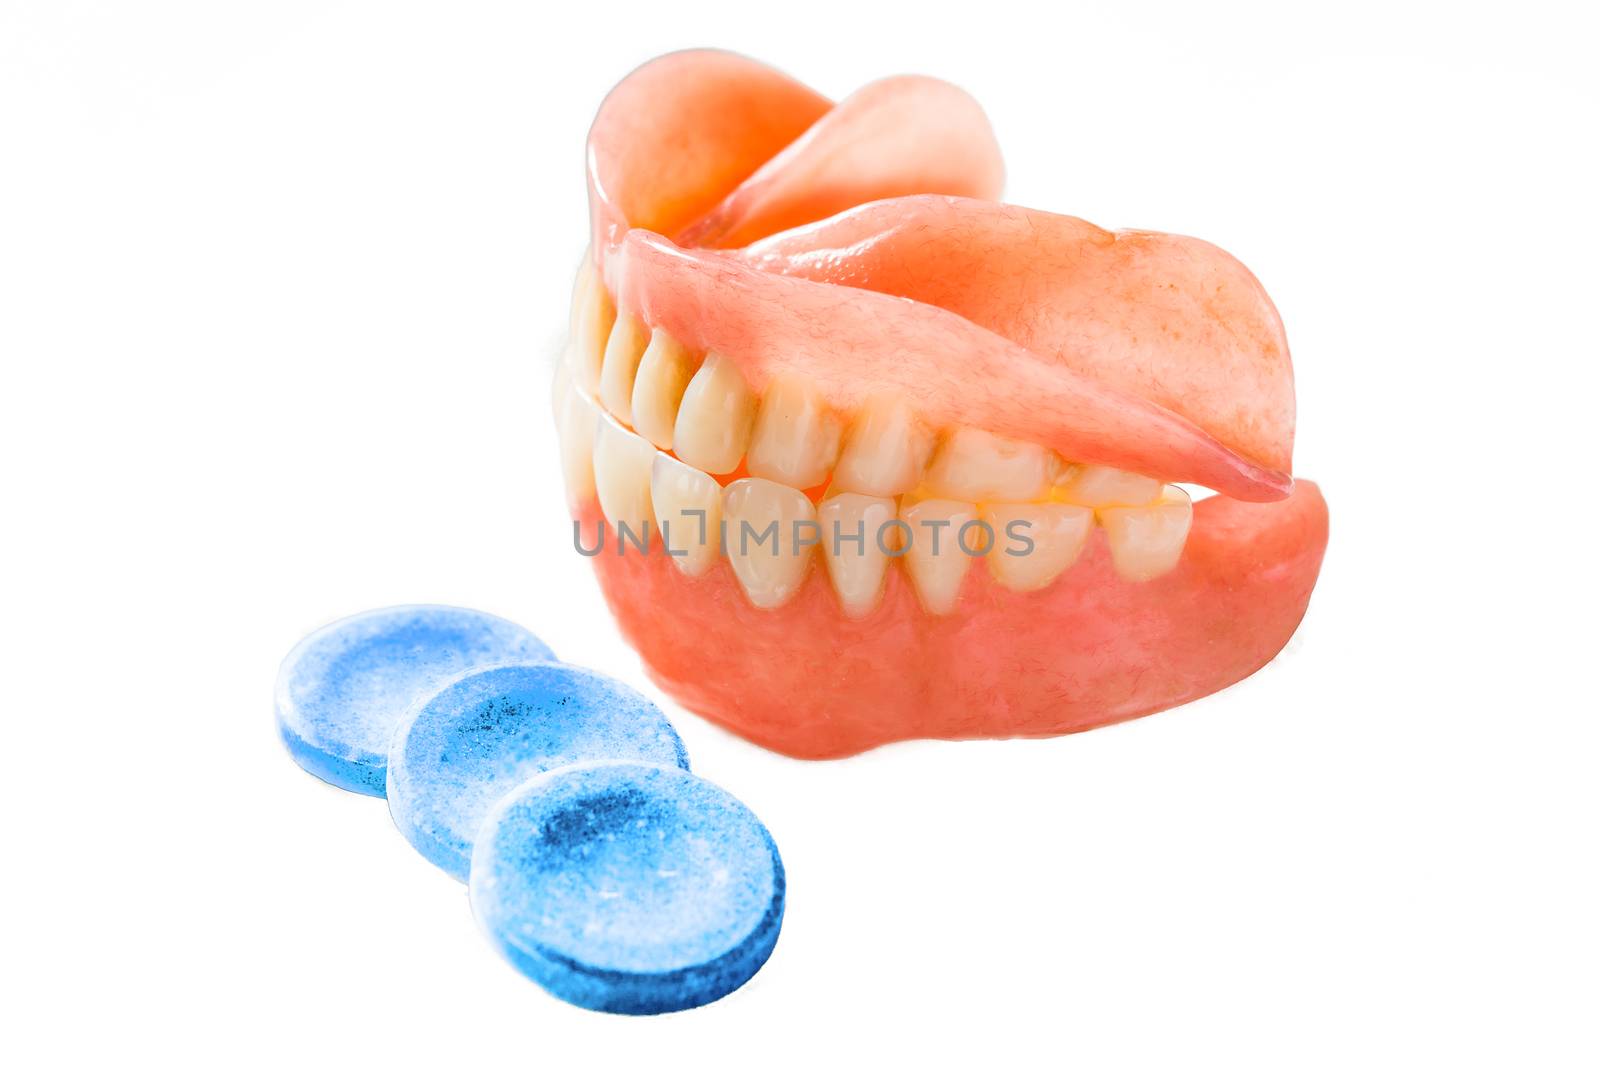 Dentures and three tablet to clean by ben44